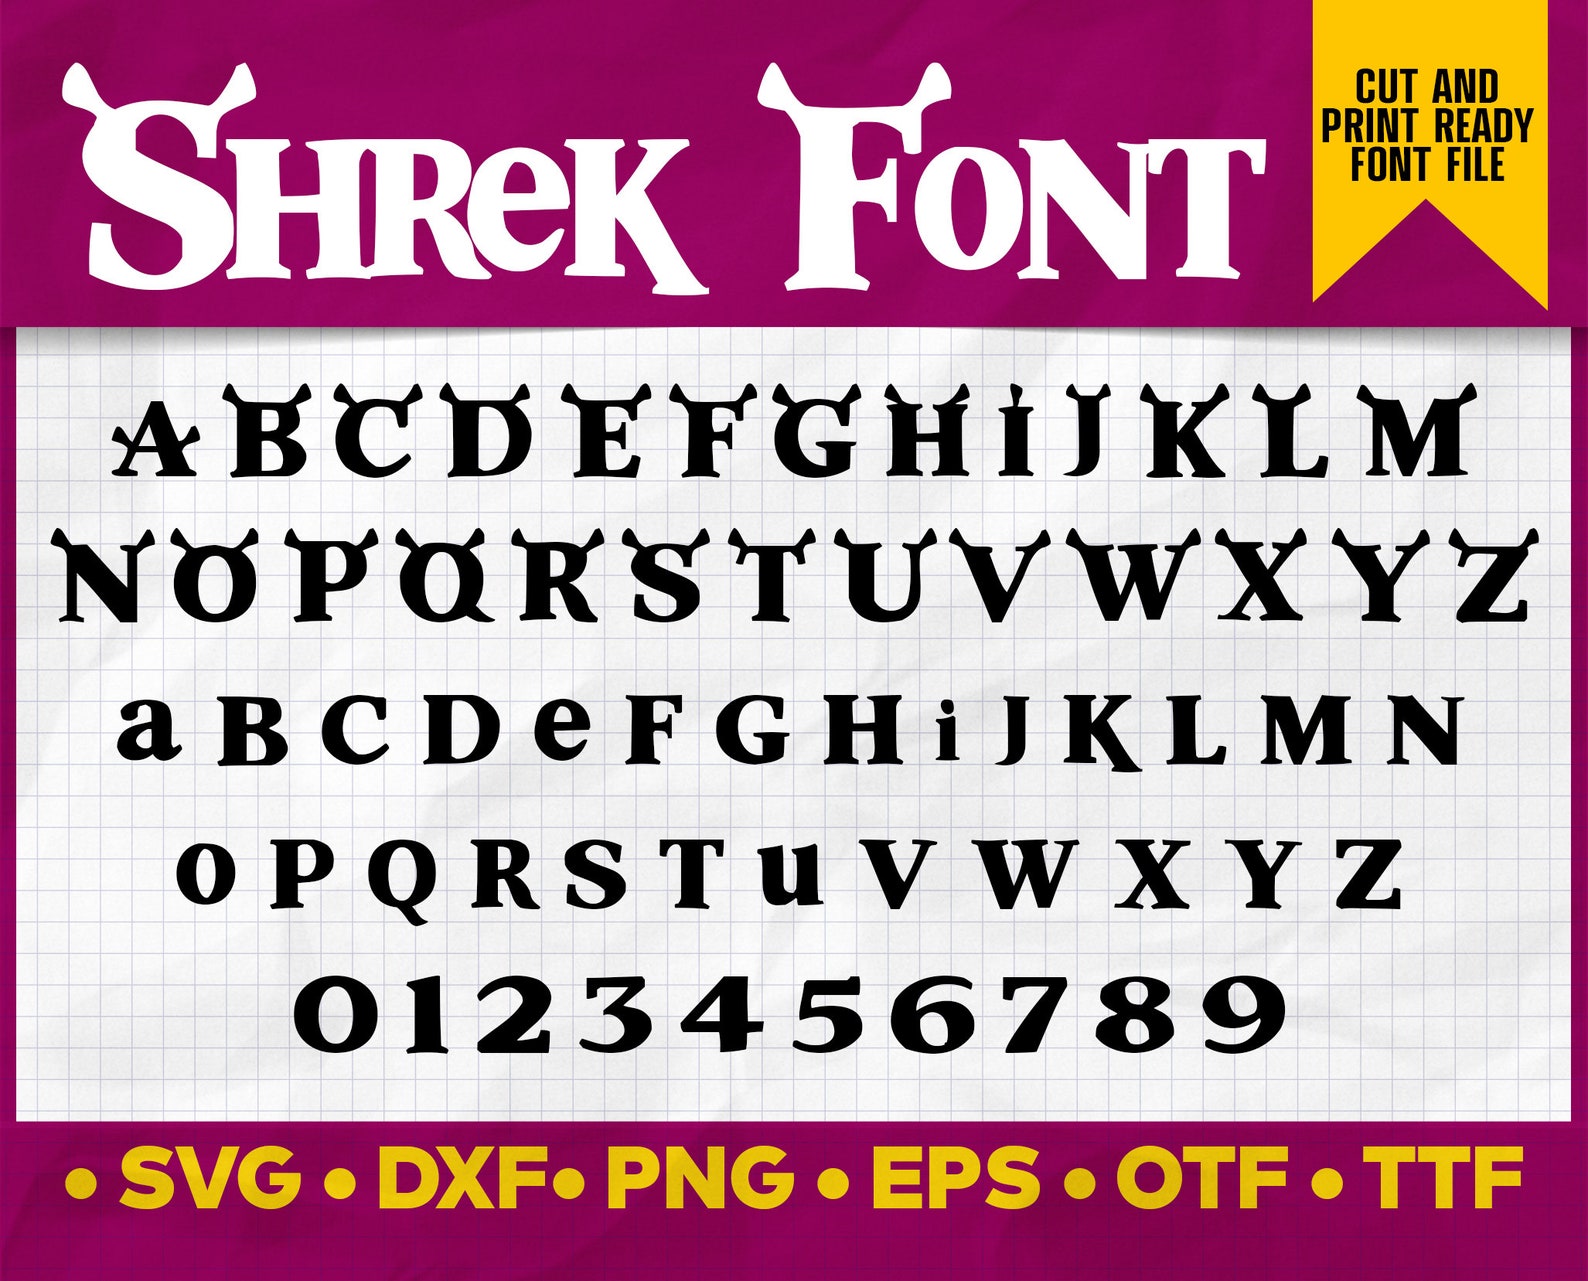 Shrek Font Shrek Svg Shrek Font Shrek Font Svg Shrek Etsy | Images and ...